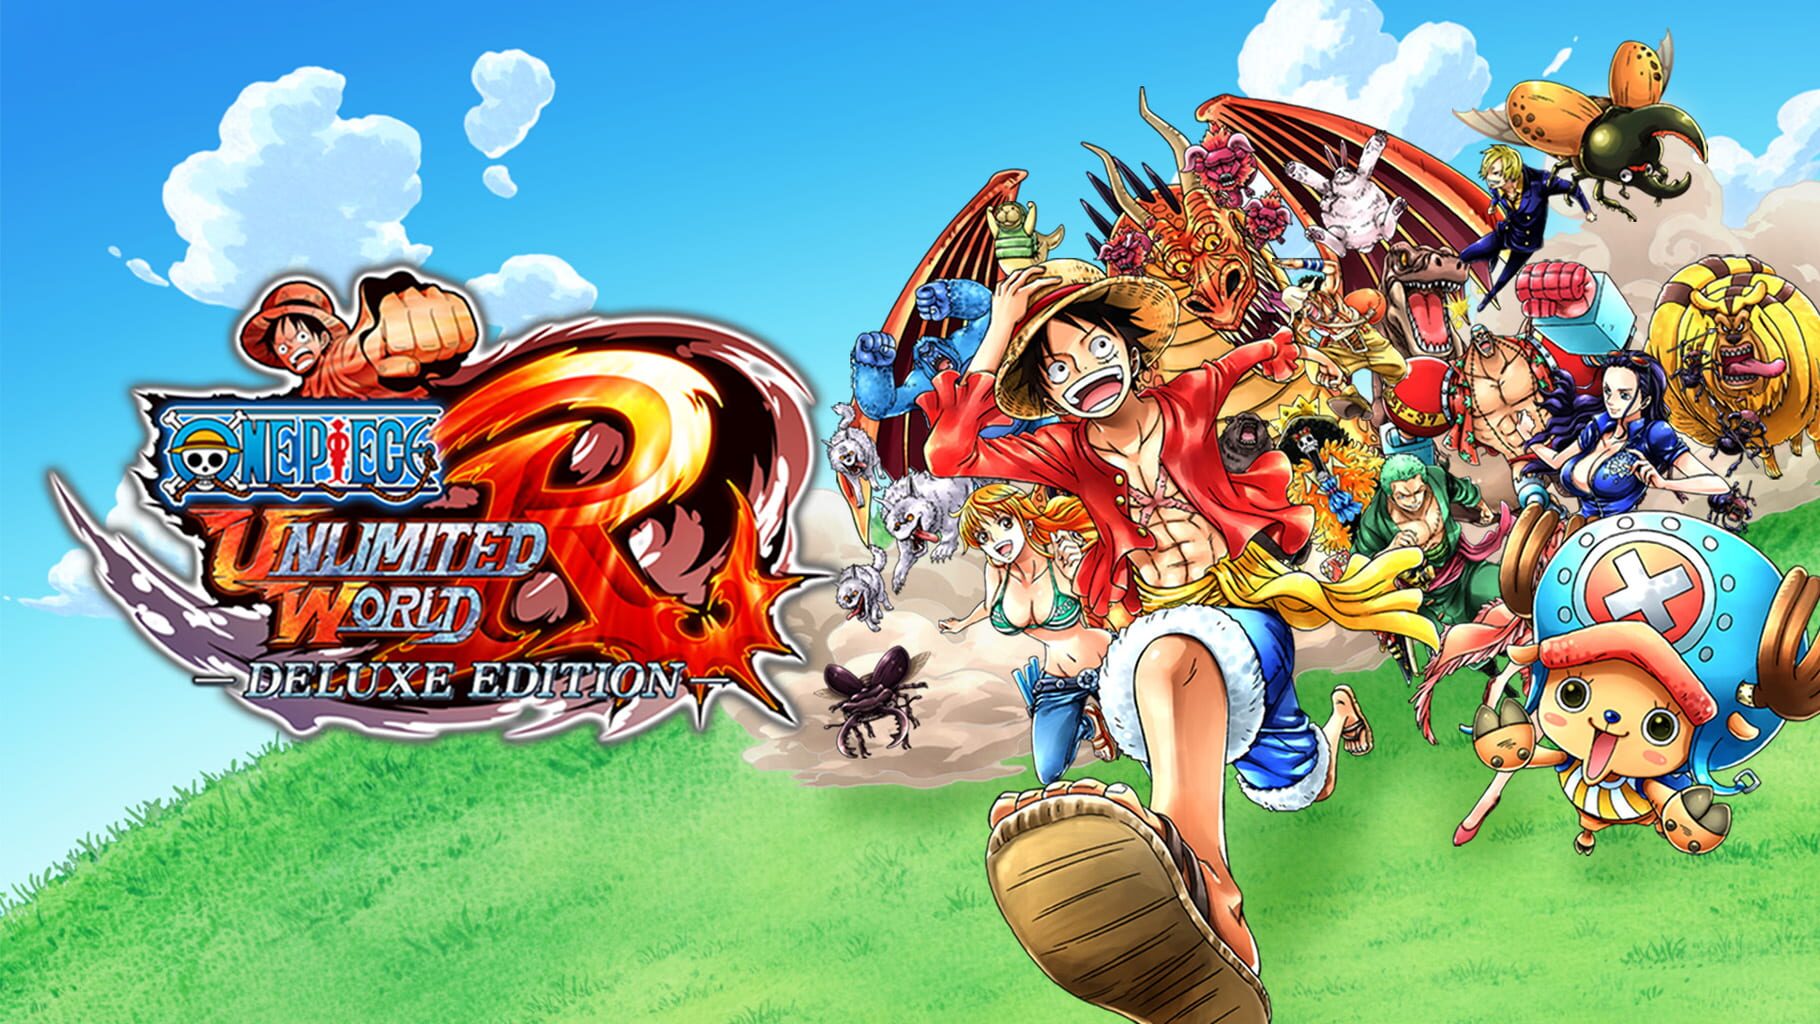 Arte - One Piece: Unlimited World Red - Deluxe Edition